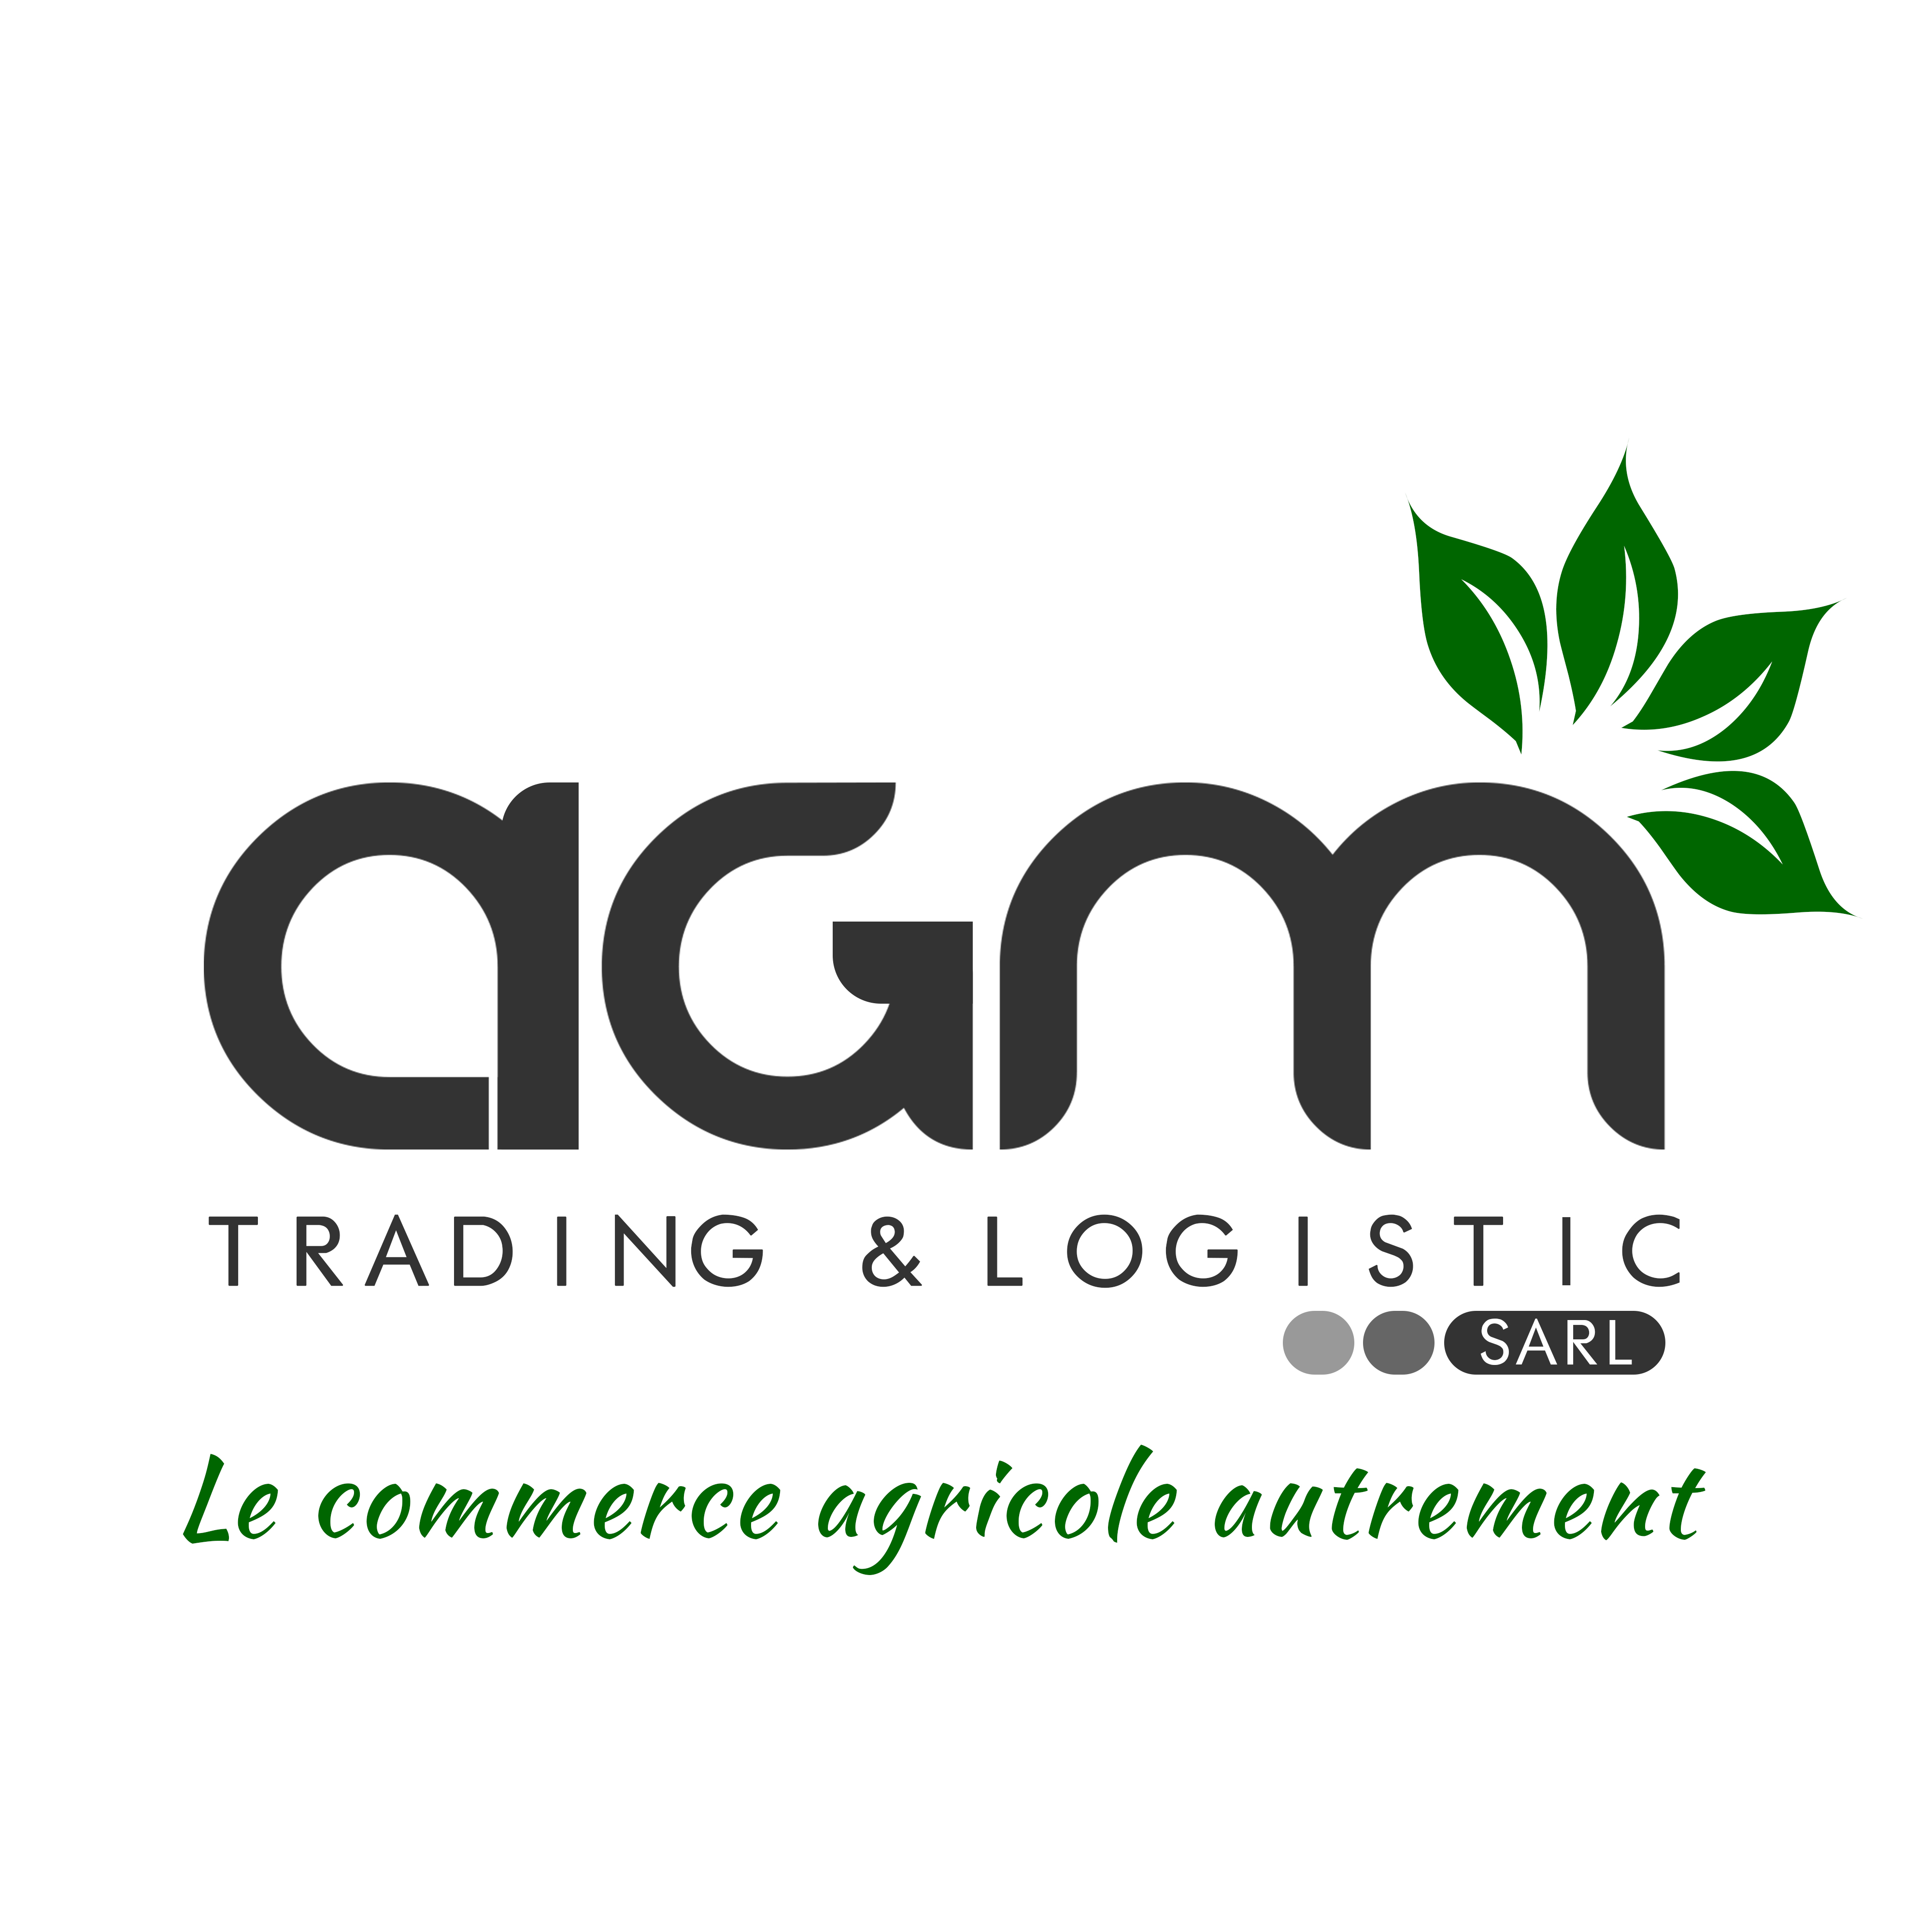 AGRIGROWTH MANAGEMENT TRADING & LOGISTIC